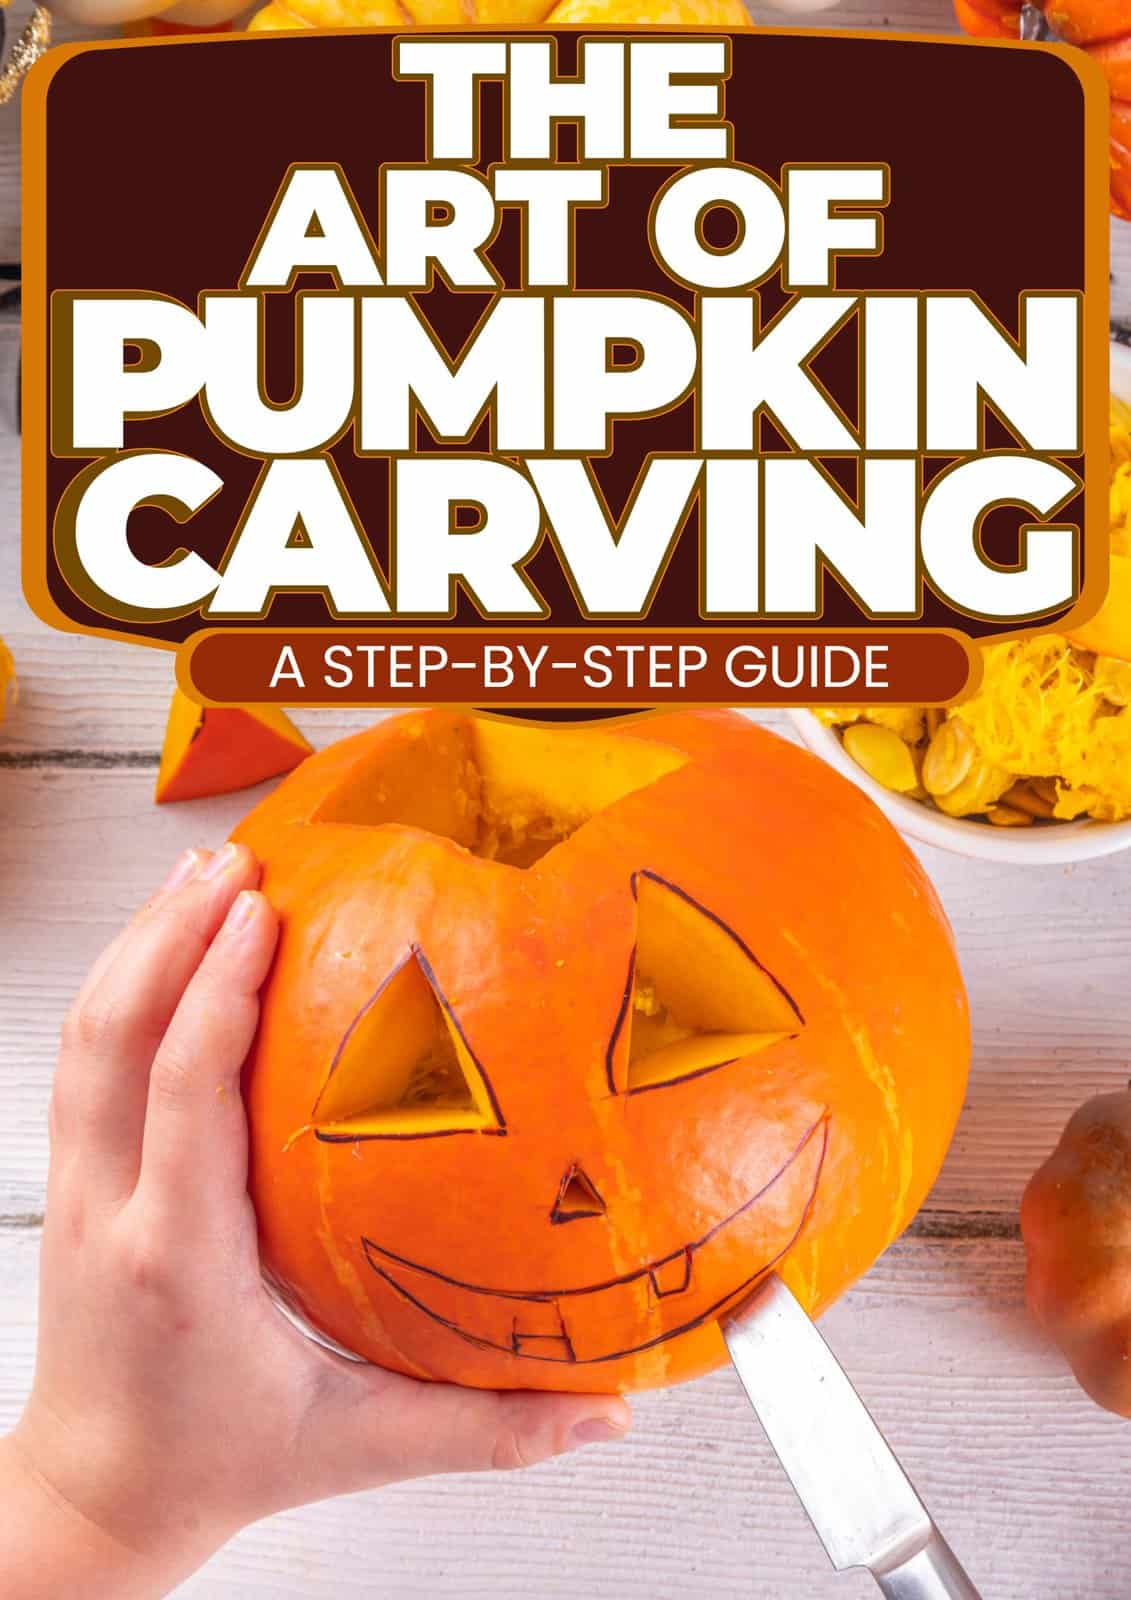 The Art of Pumpkin Carving: A Step-by-Step Guide